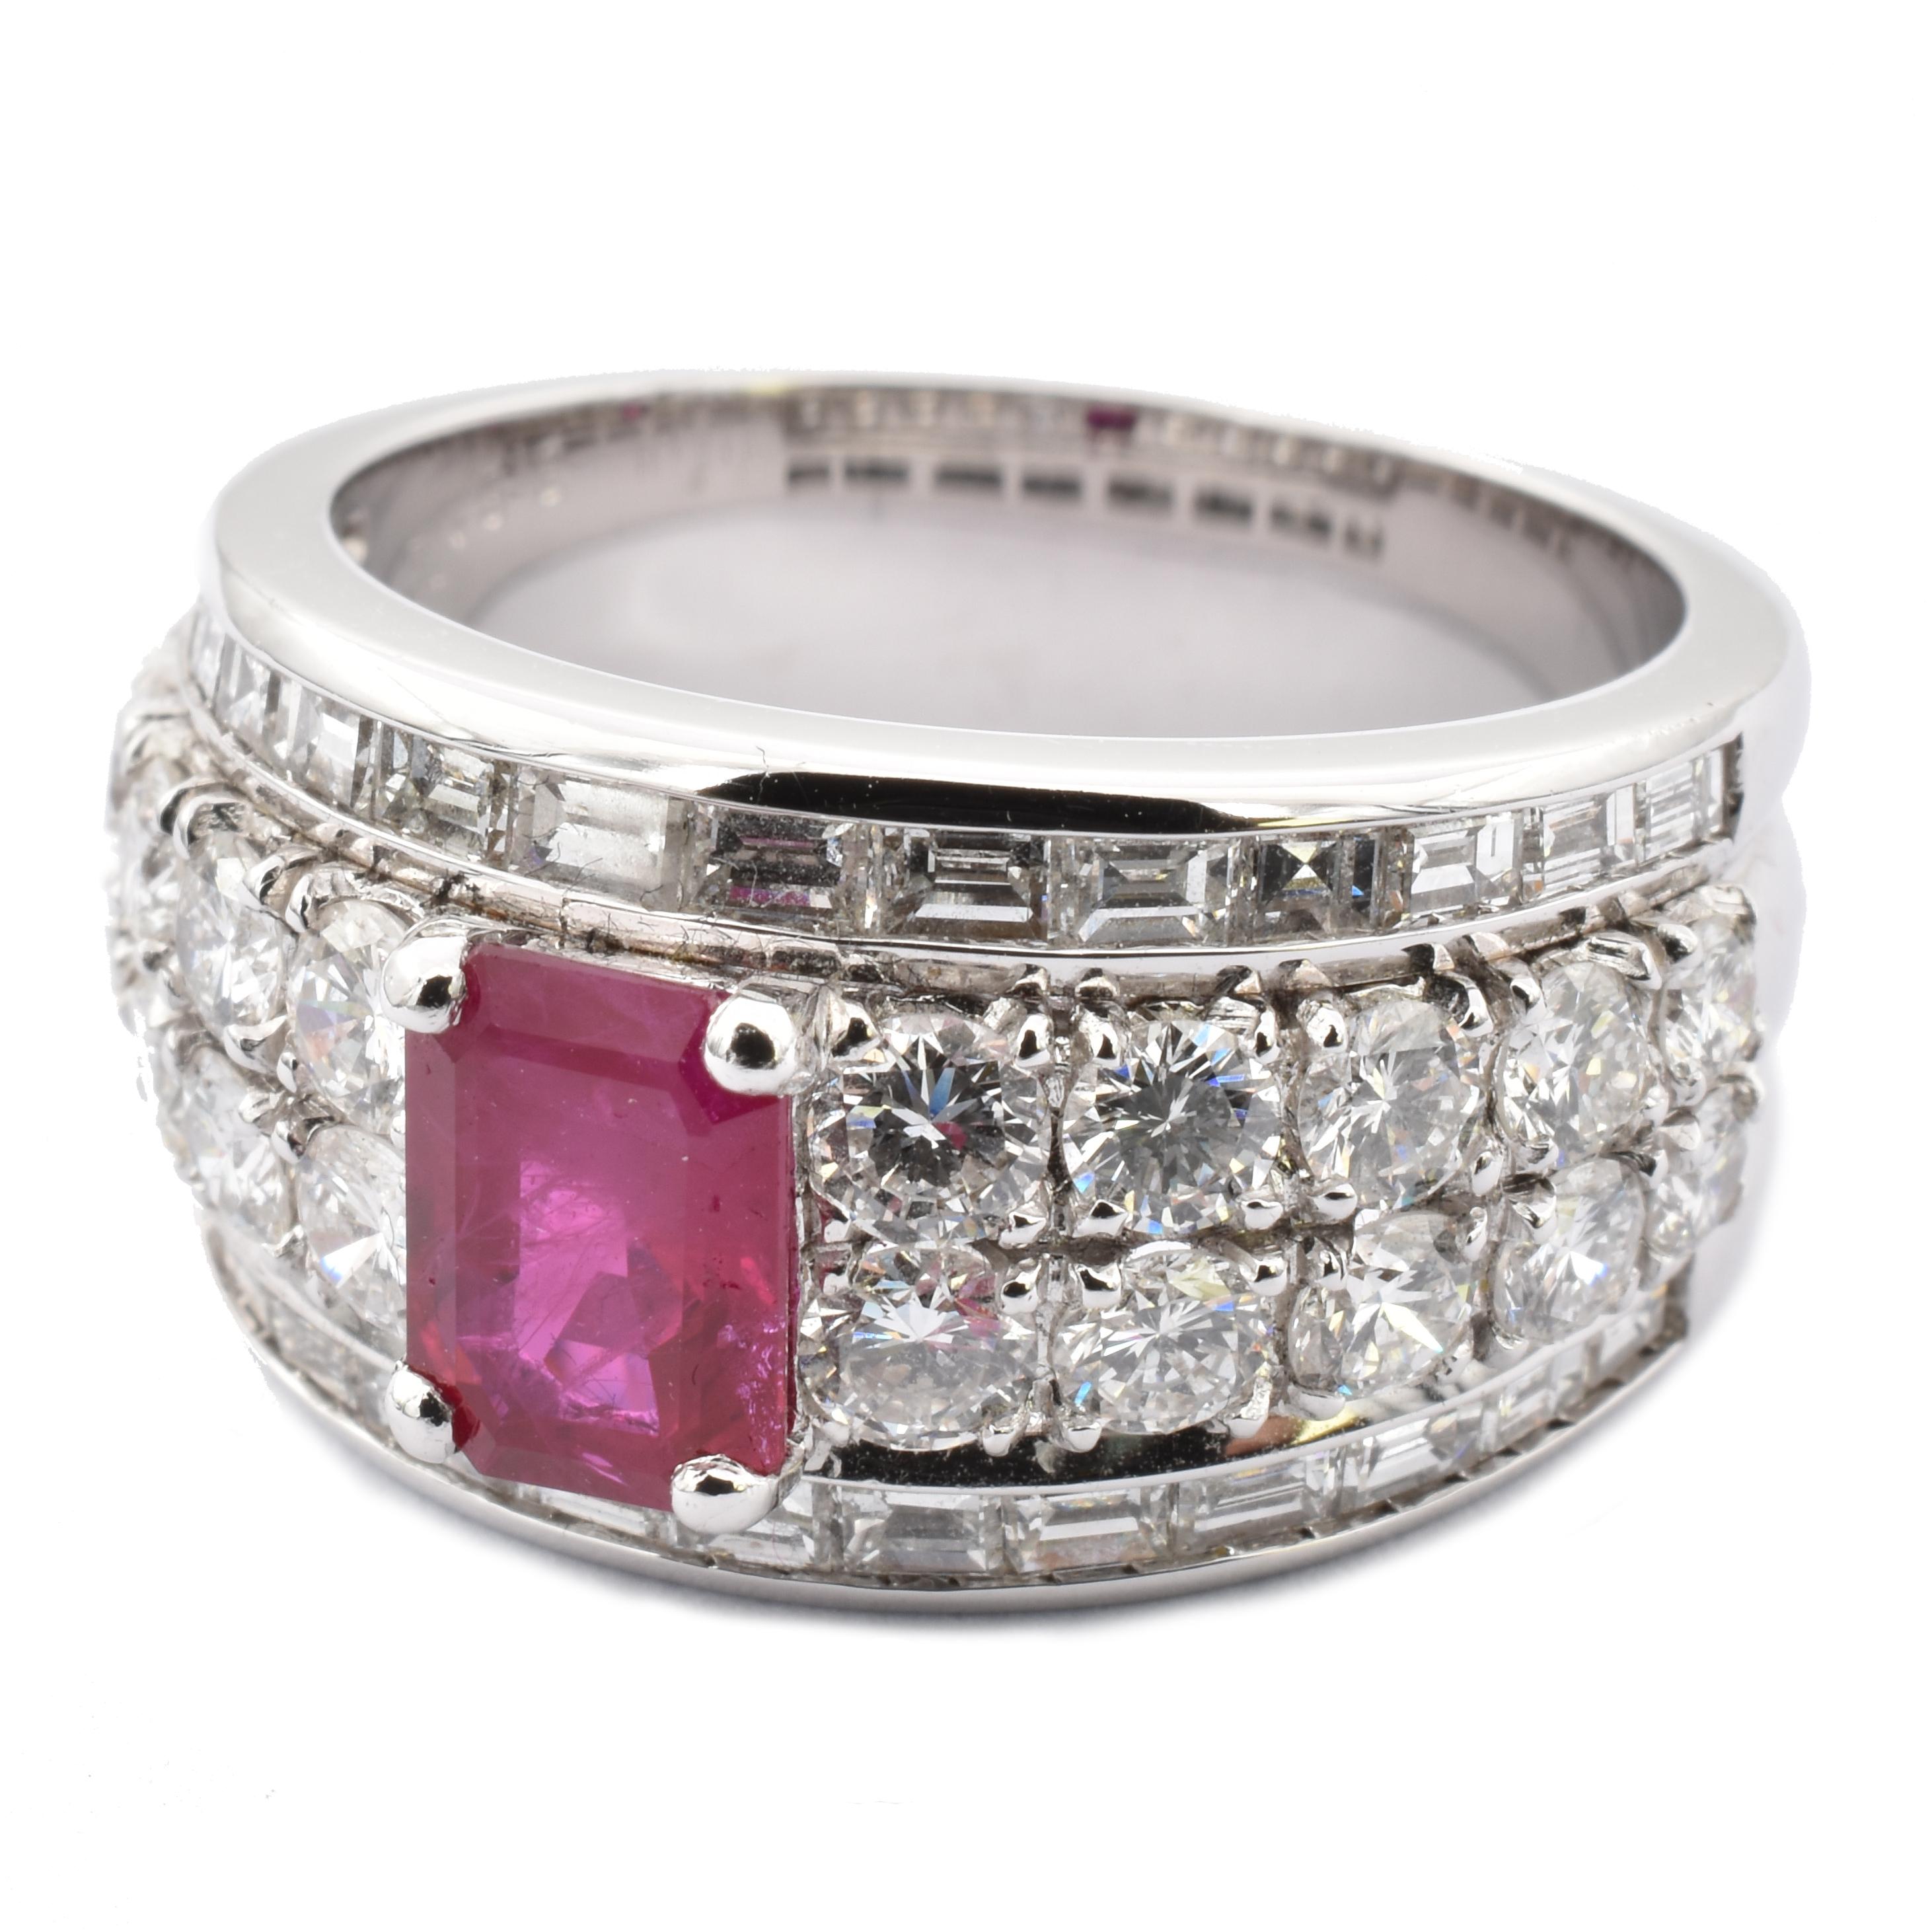 Gilberto Cassola 18Kt White Gold Ring with an Emerald Cut Intense Red Natural Ruby. 
This Ring has 10 Brillant Cut Round Diamonds on each side of the Ruby and 2 rows of Baguette Cut Diamonds.
Natural Ruby ct 0.98 mm 7.00 X 4.90
Round Diamonds are G